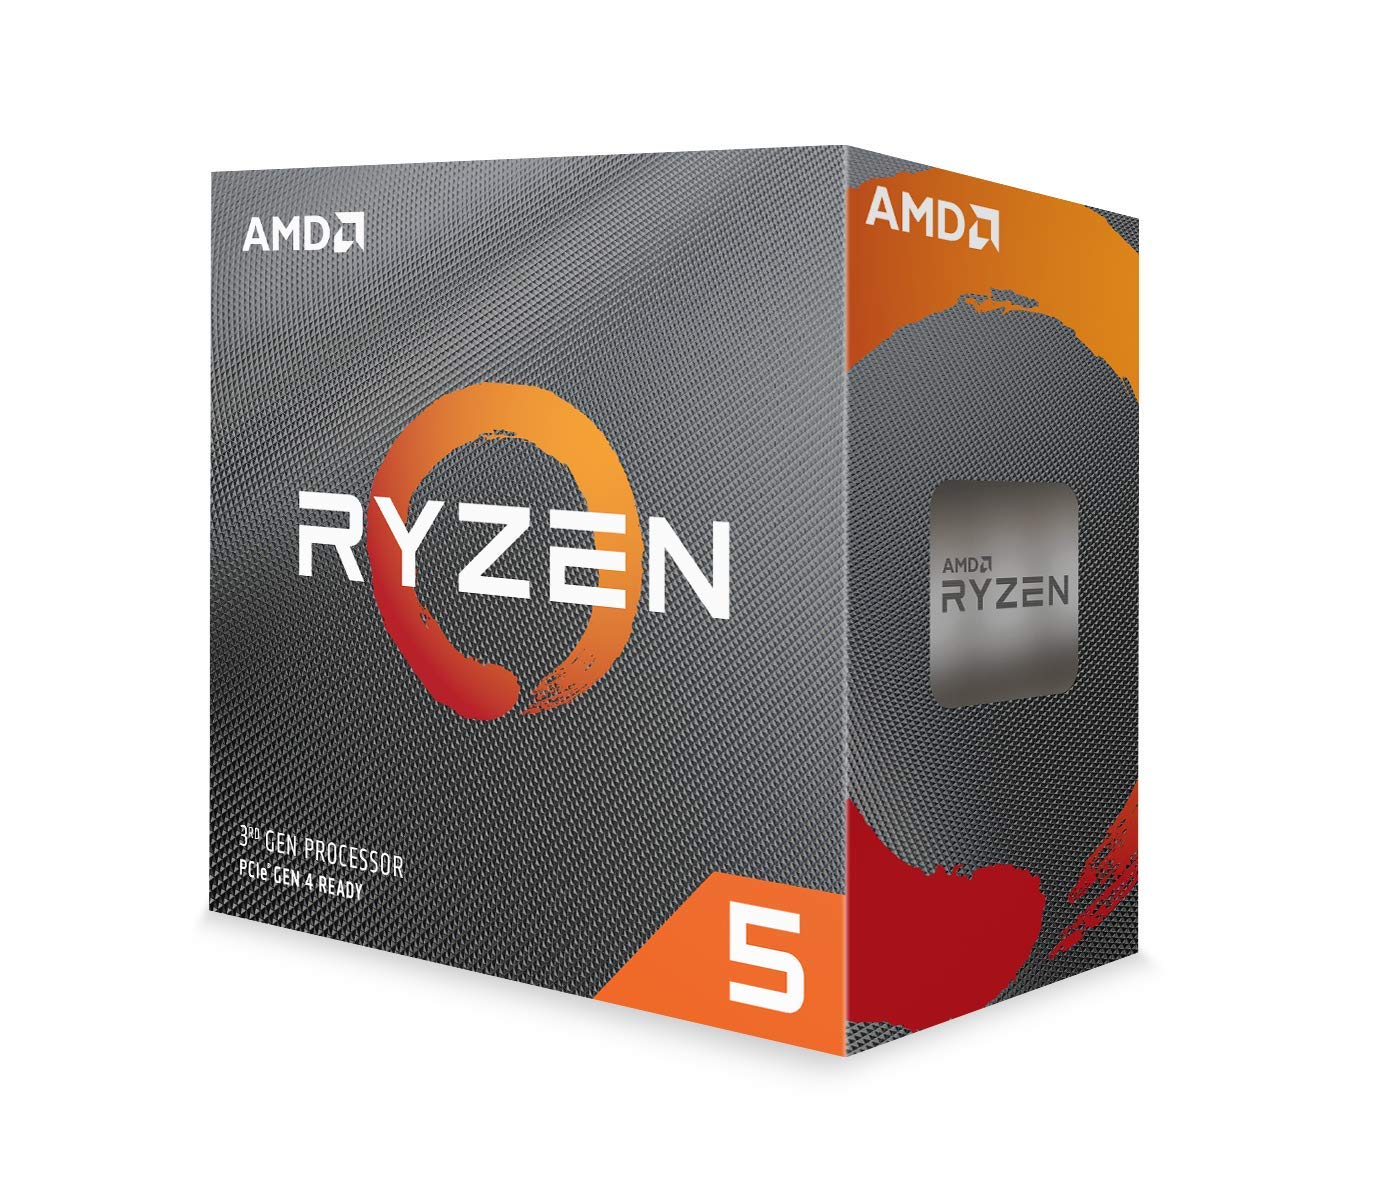 AMD Ryzen 5 3600 Review: Non-X Marks the Spot - Tom's Hardware 